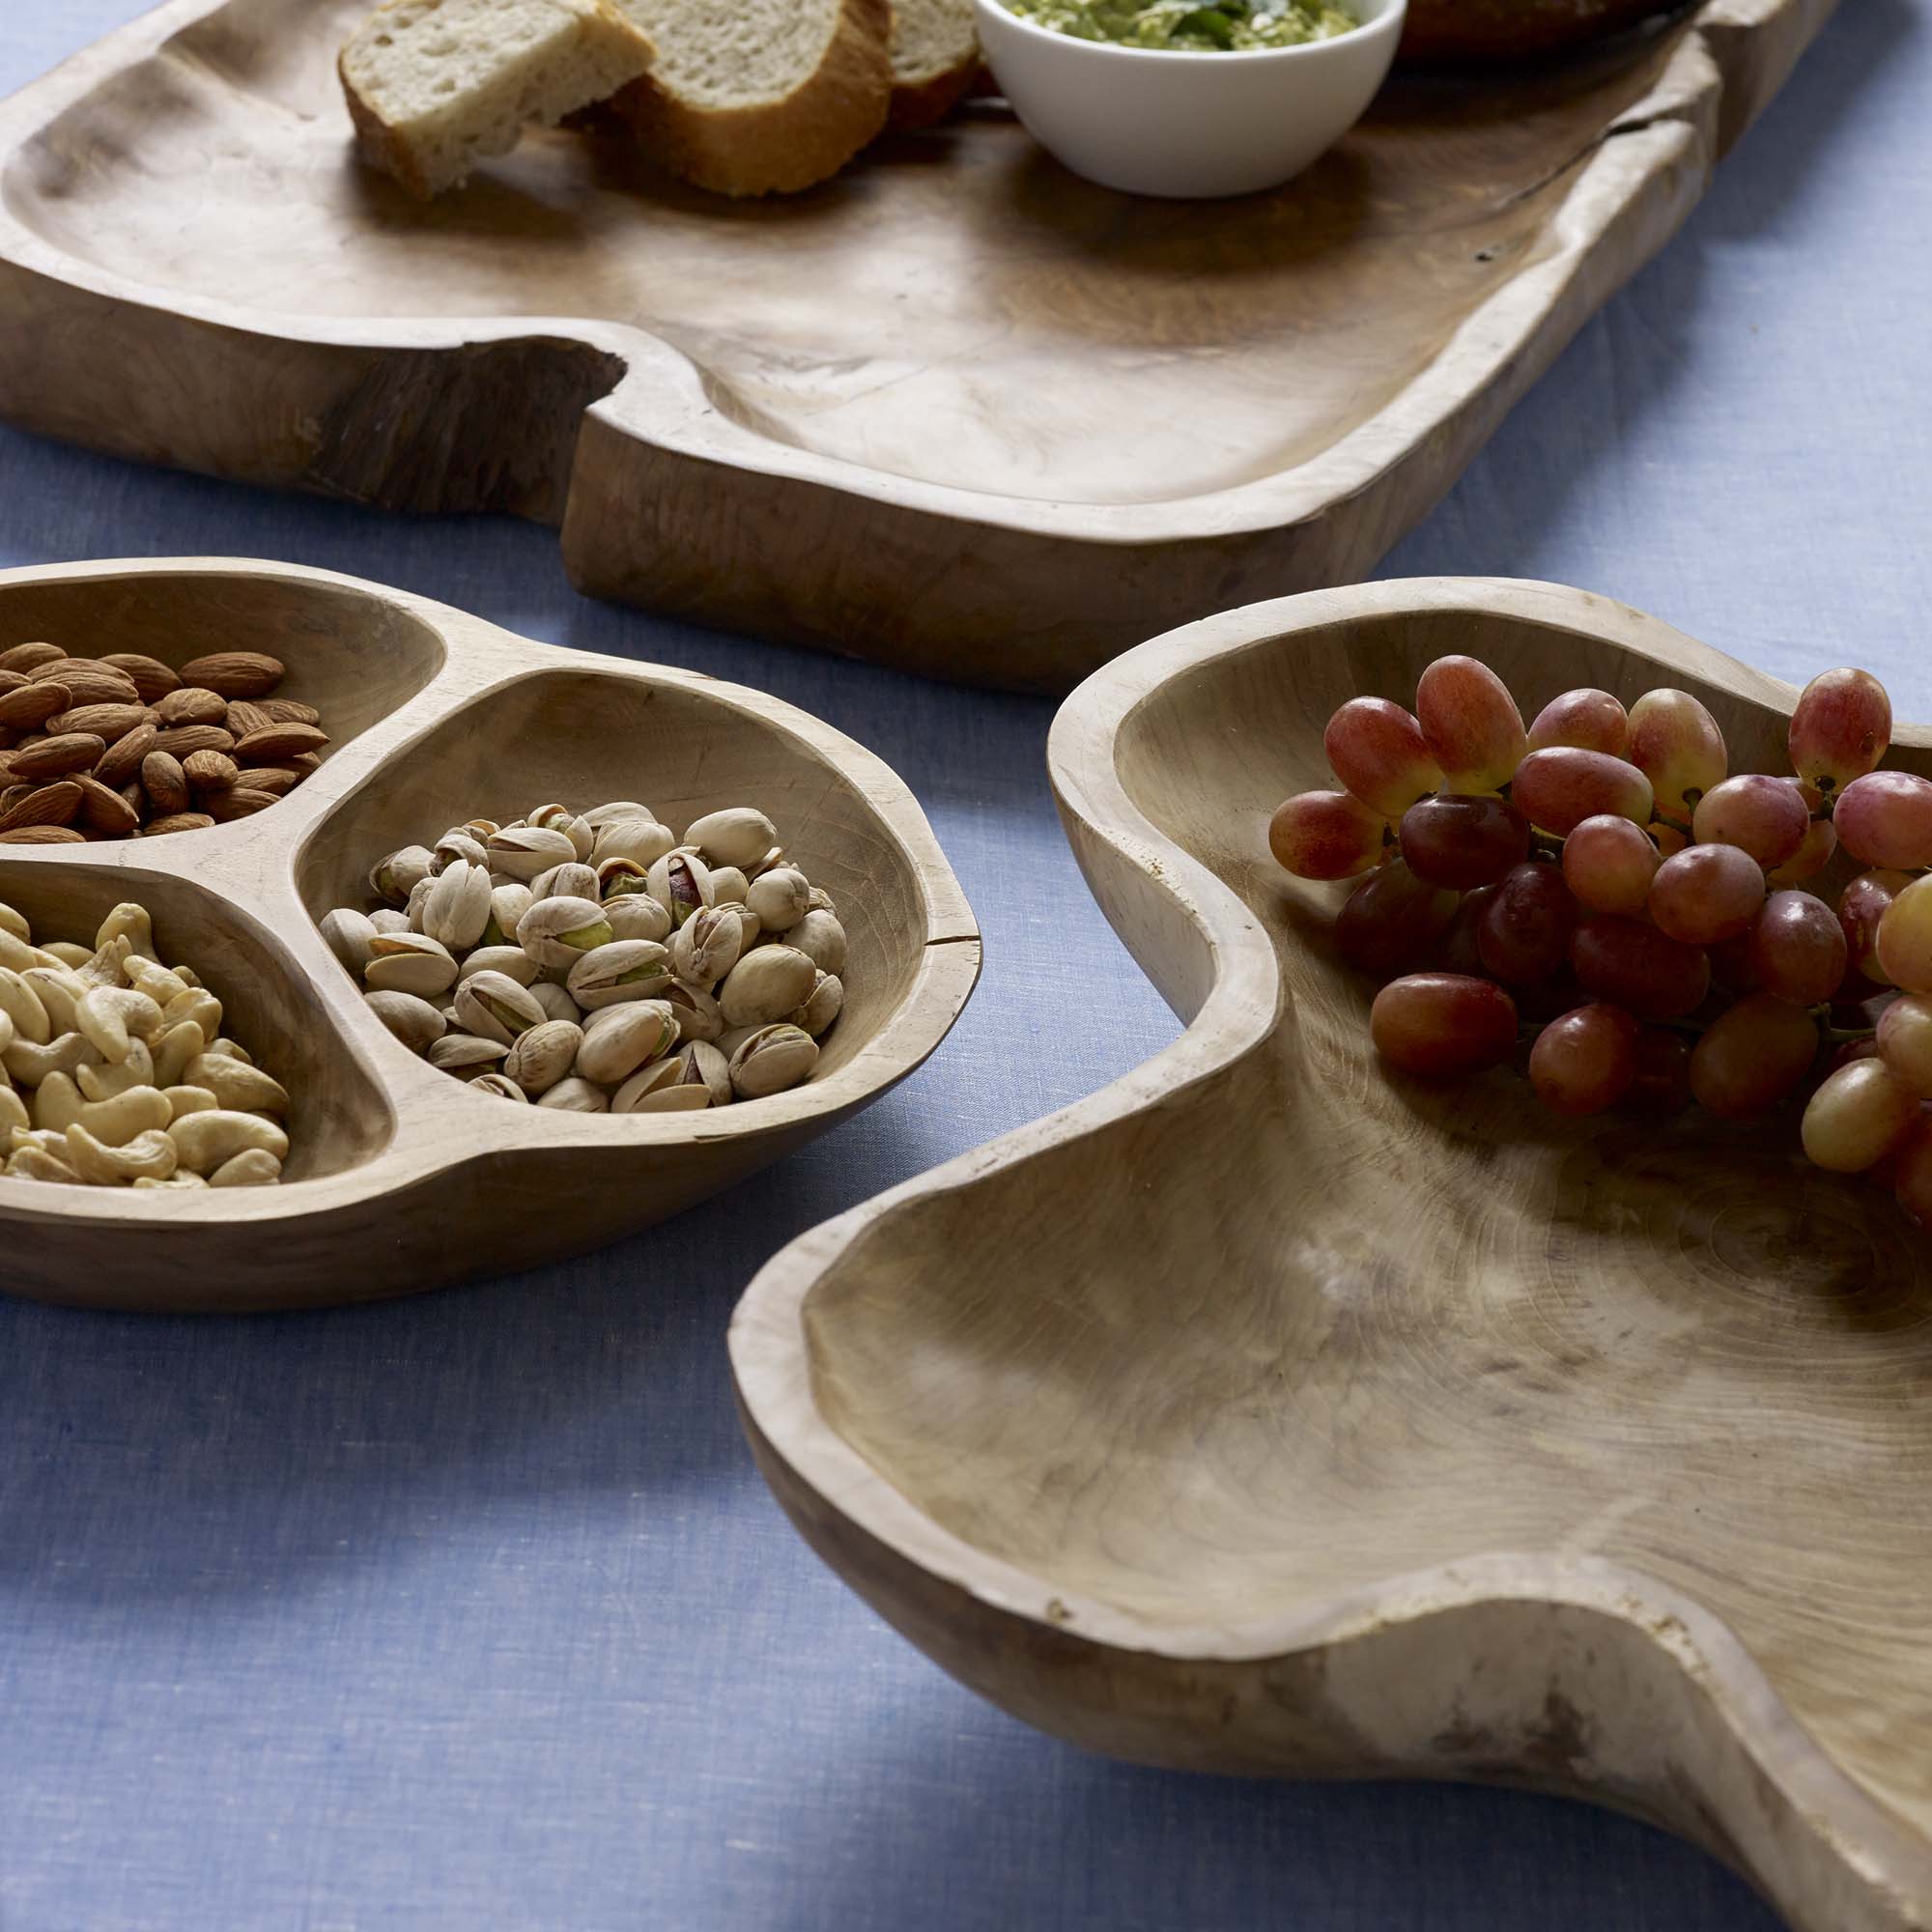 Takara Teak Root Display Bowl Natural Color | Image 2 | From the Takara Collection | Skillfully made with natural teak root for long lasting use | This bowl is sustainably sourced | Available in natural color | texxture home